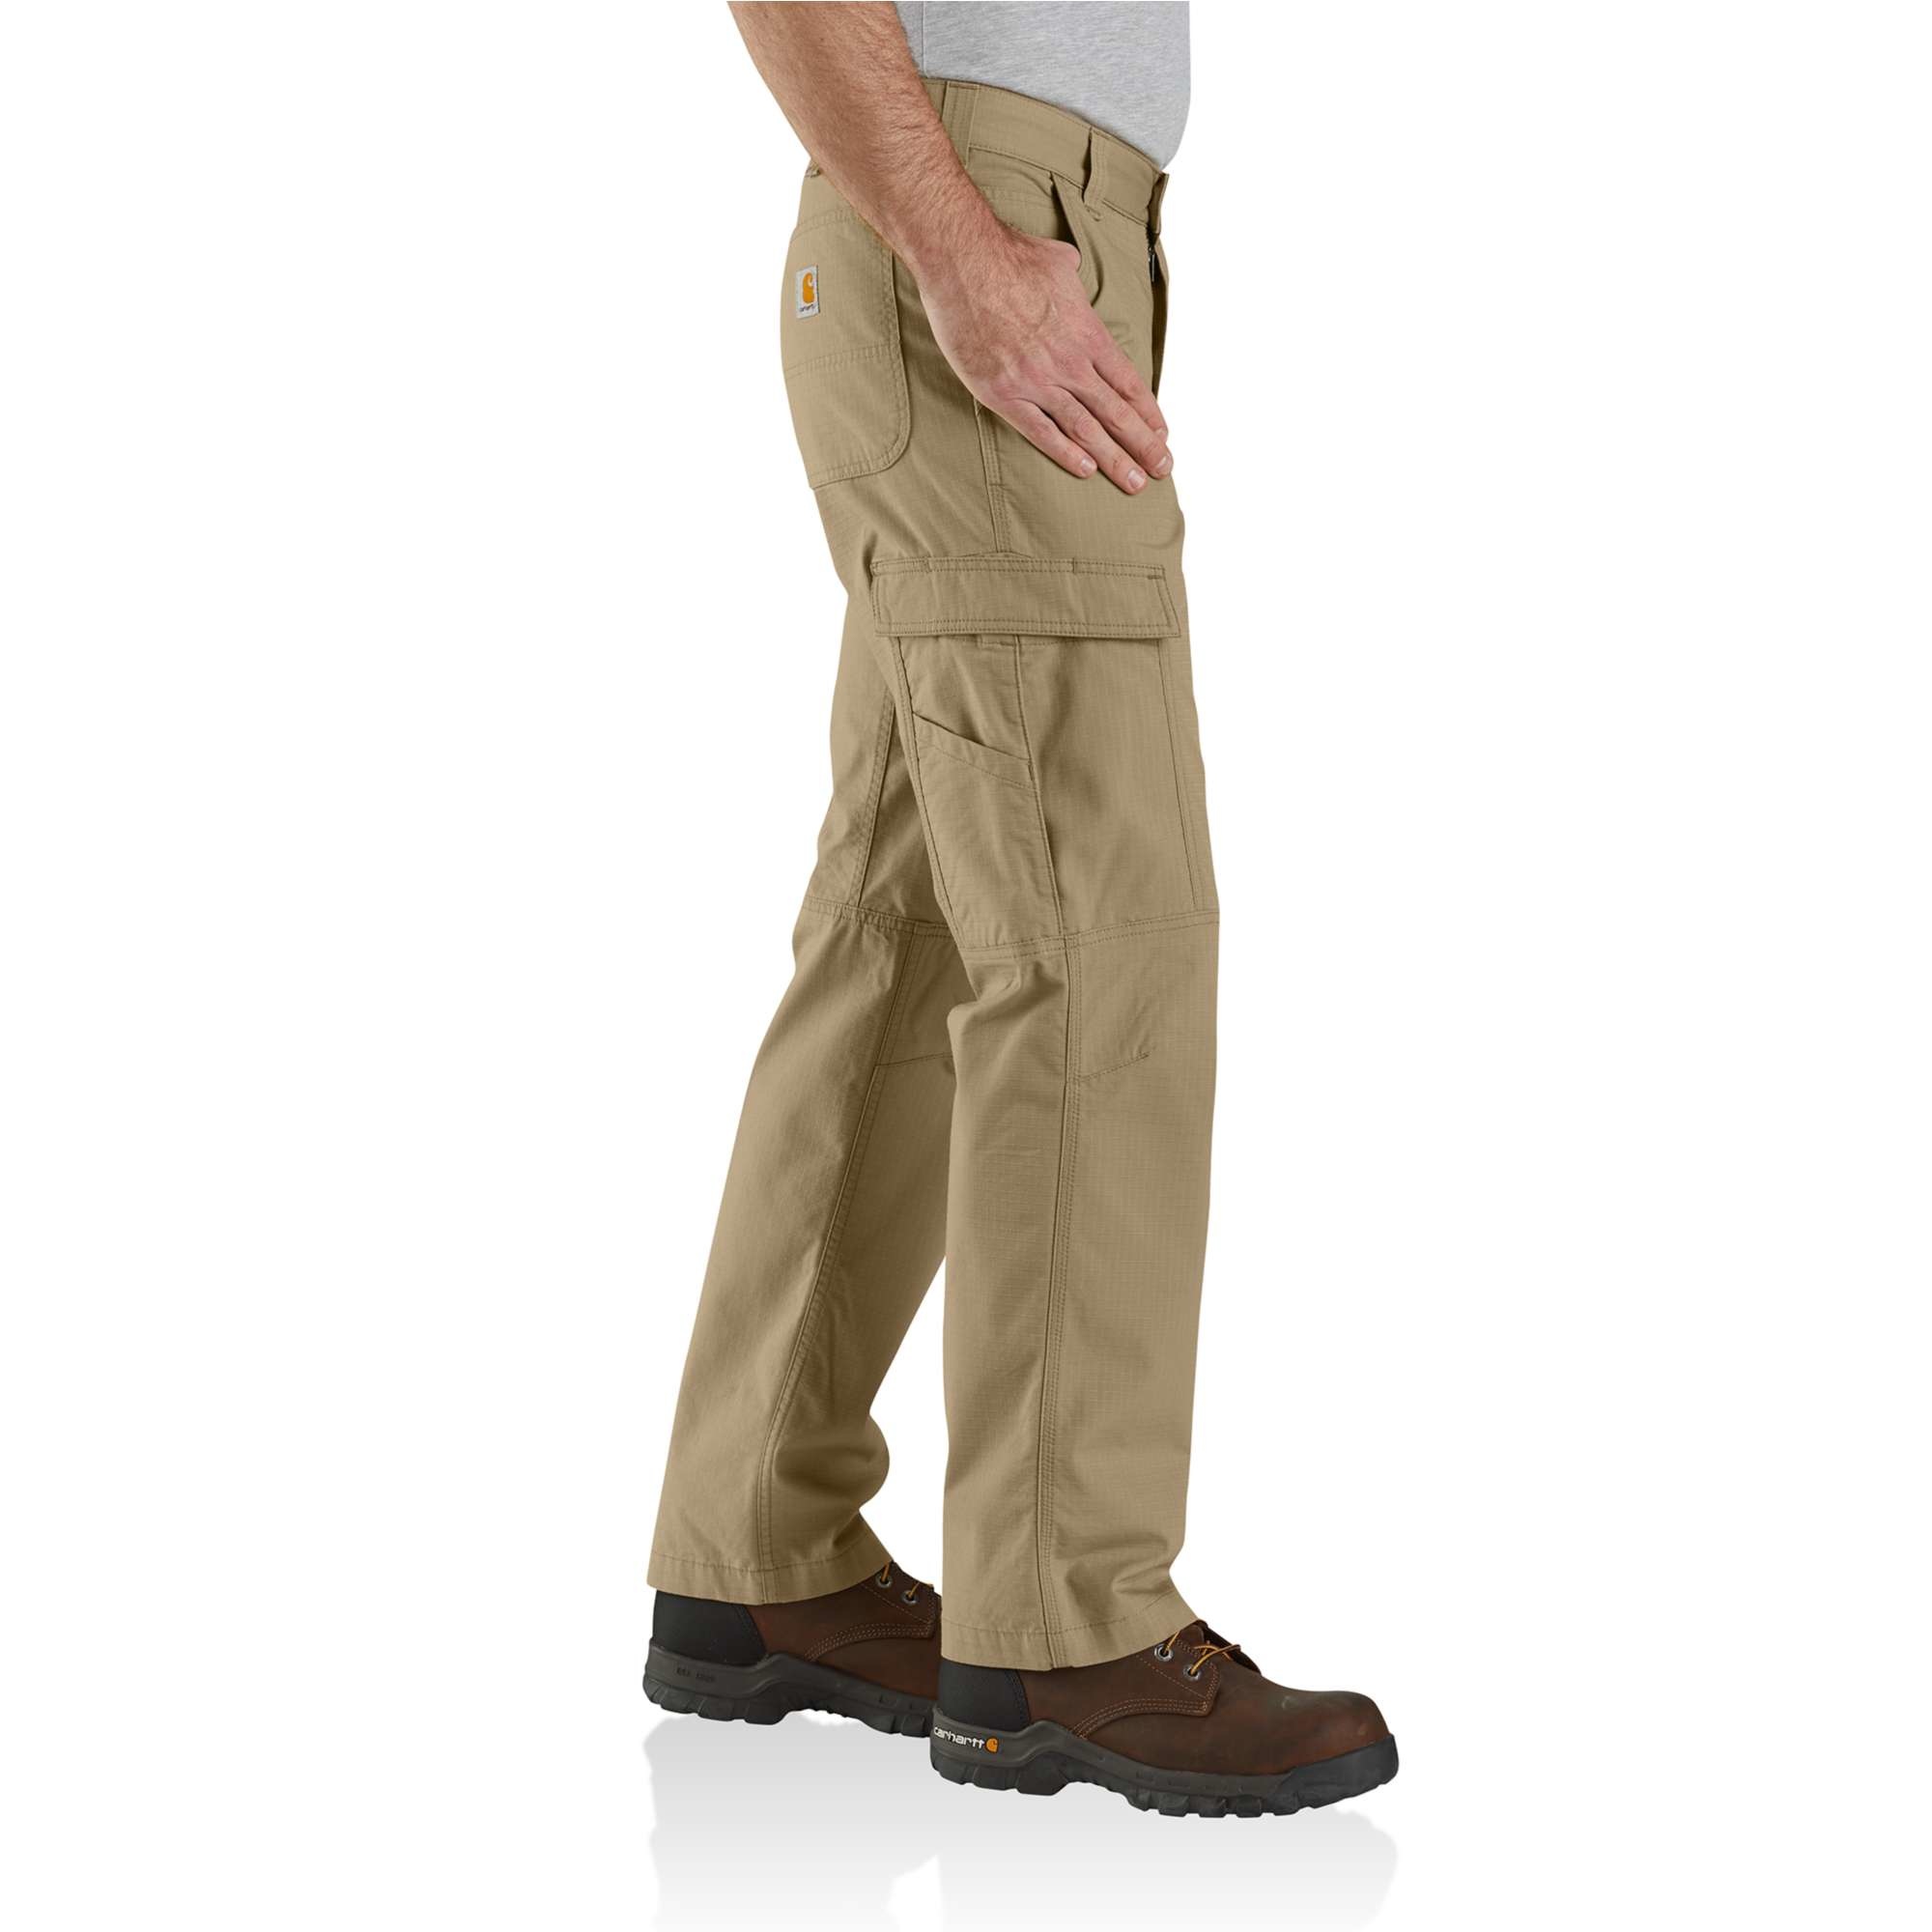 Carhartt Mens Shadow Rugged Flex Relaxed Fit Ripstop Cargo Fleece-Lined  Work Pant